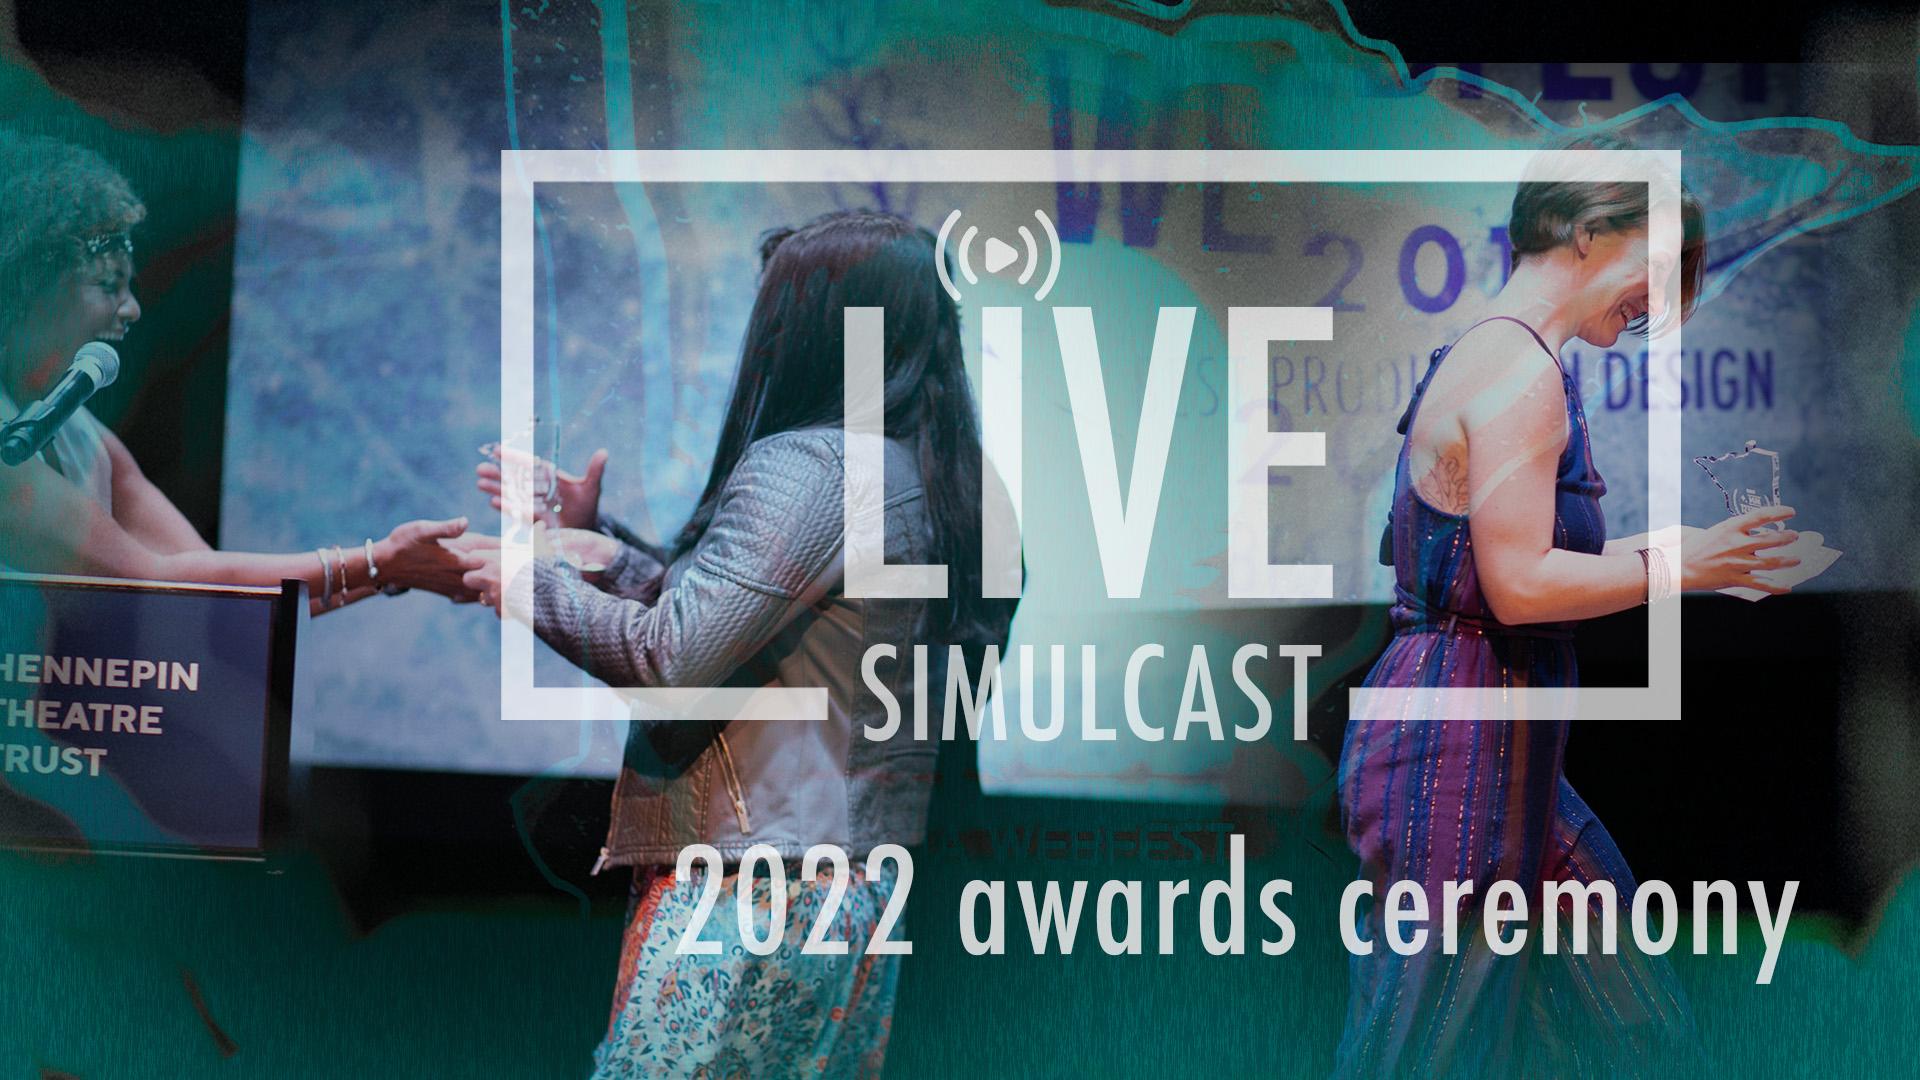 Simulcast of the 2022 Awards Ceremony